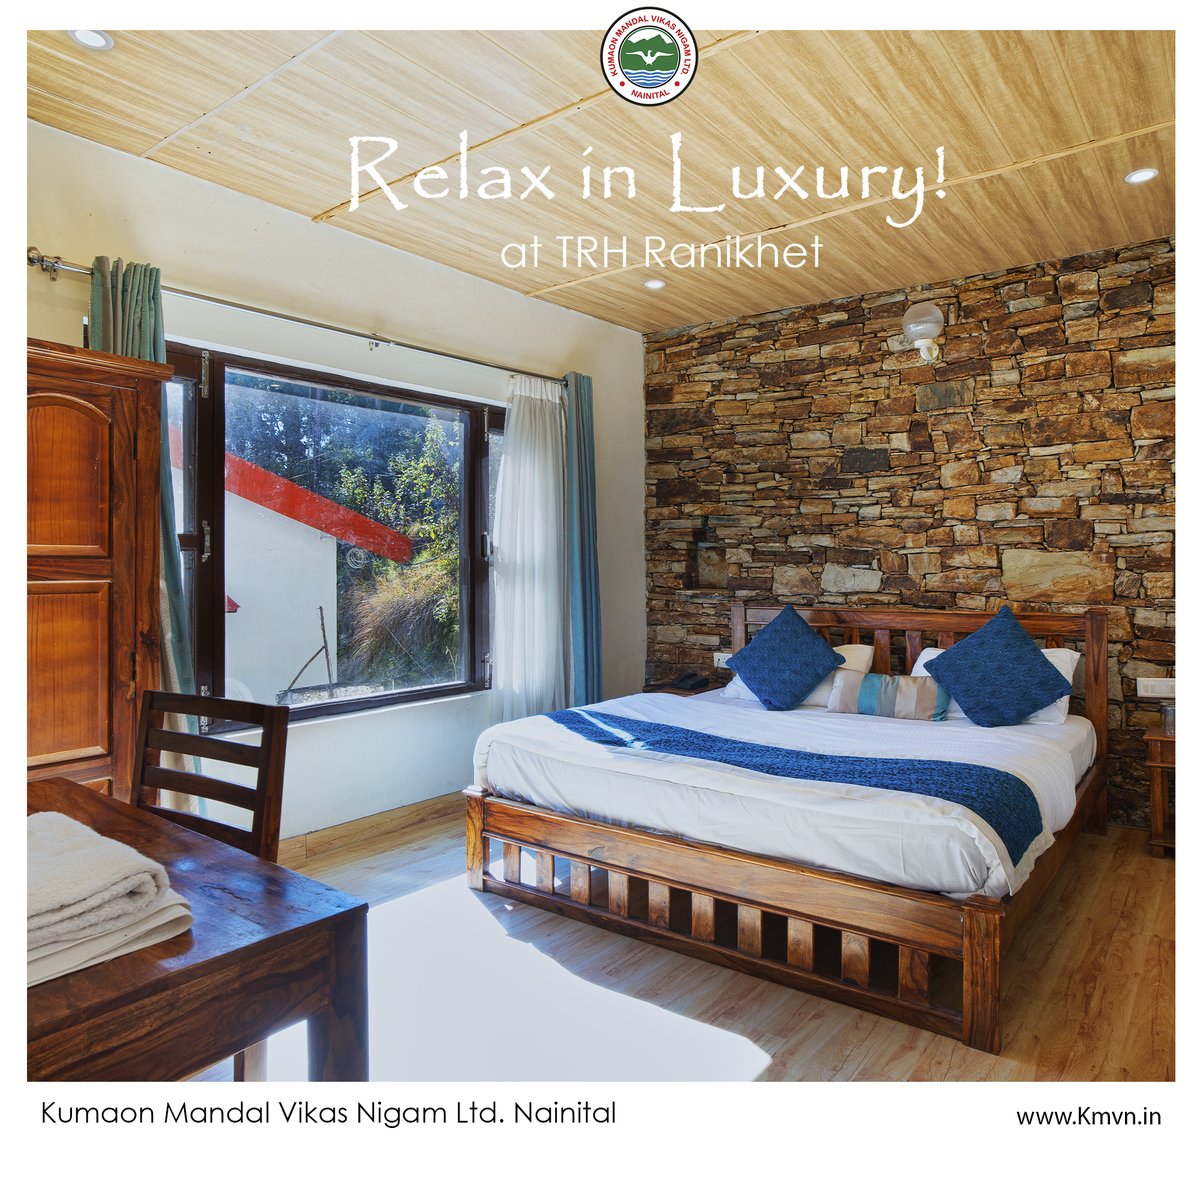 Breathe deeply and reconnect yourself with nature. TRH #Ranikhet welcomes you to experience the radiant sun, breathe in the pure air, and above all enjoy the warmth of our ever-welcoming people. Add #Kumaon to your itinerary and create everlasting memories with KMVN.